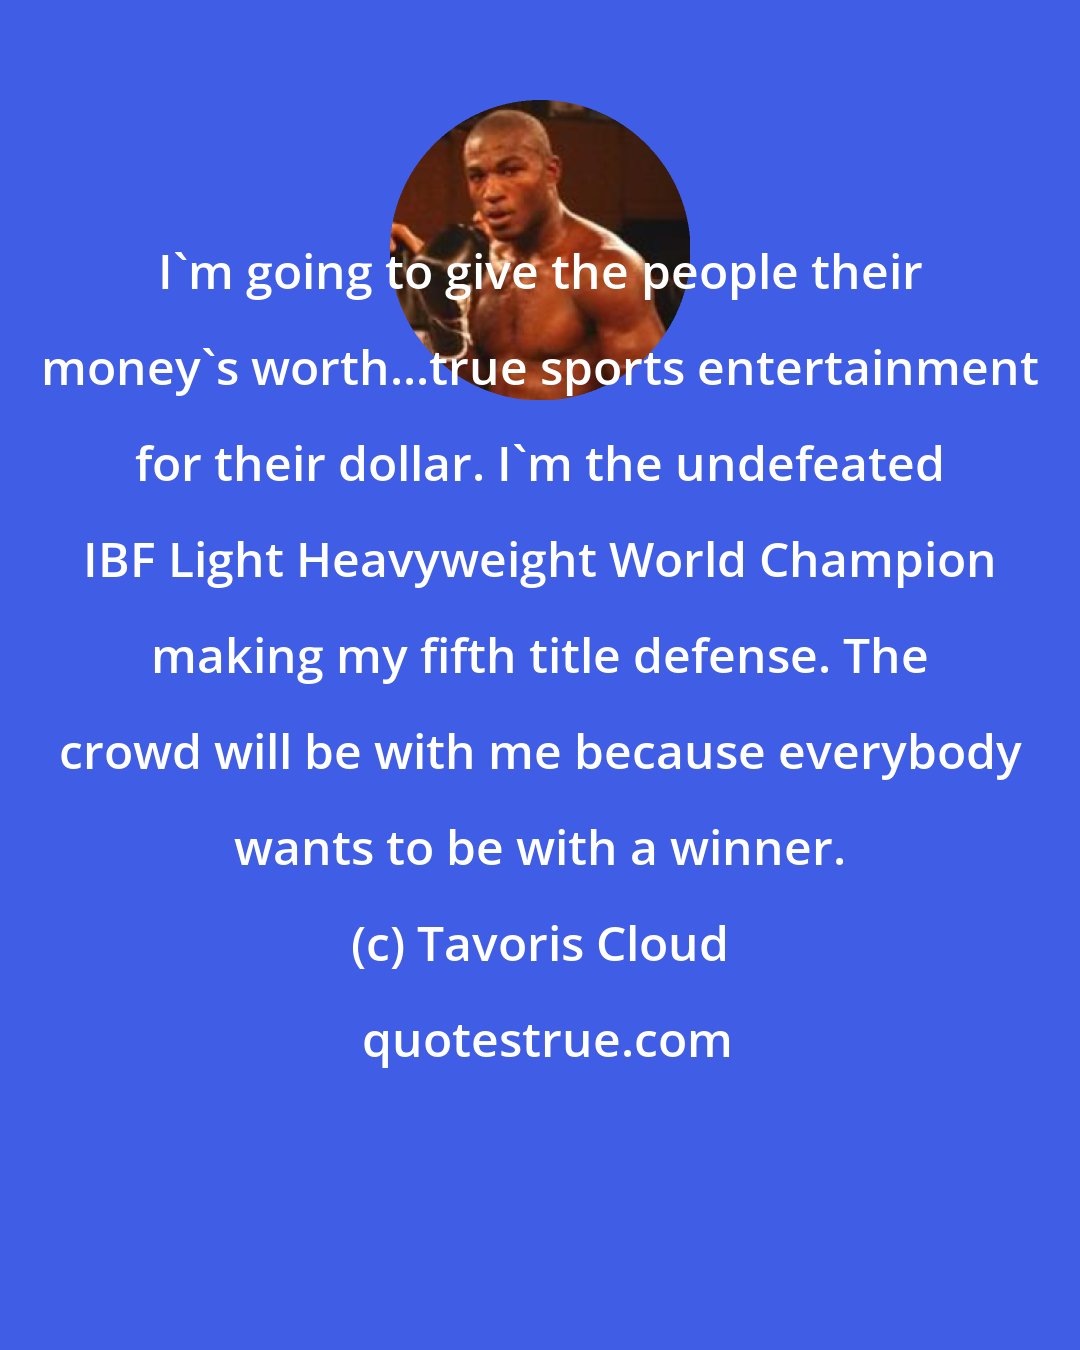 Tavoris Cloud: I'm going to give the people their money's worth...true sports entertainment for their dollar. I'm the undefeated IBF Light Heavyweight World Champion making my fifth title defense. The crowd will be with me because everybody wants to be with a winner.